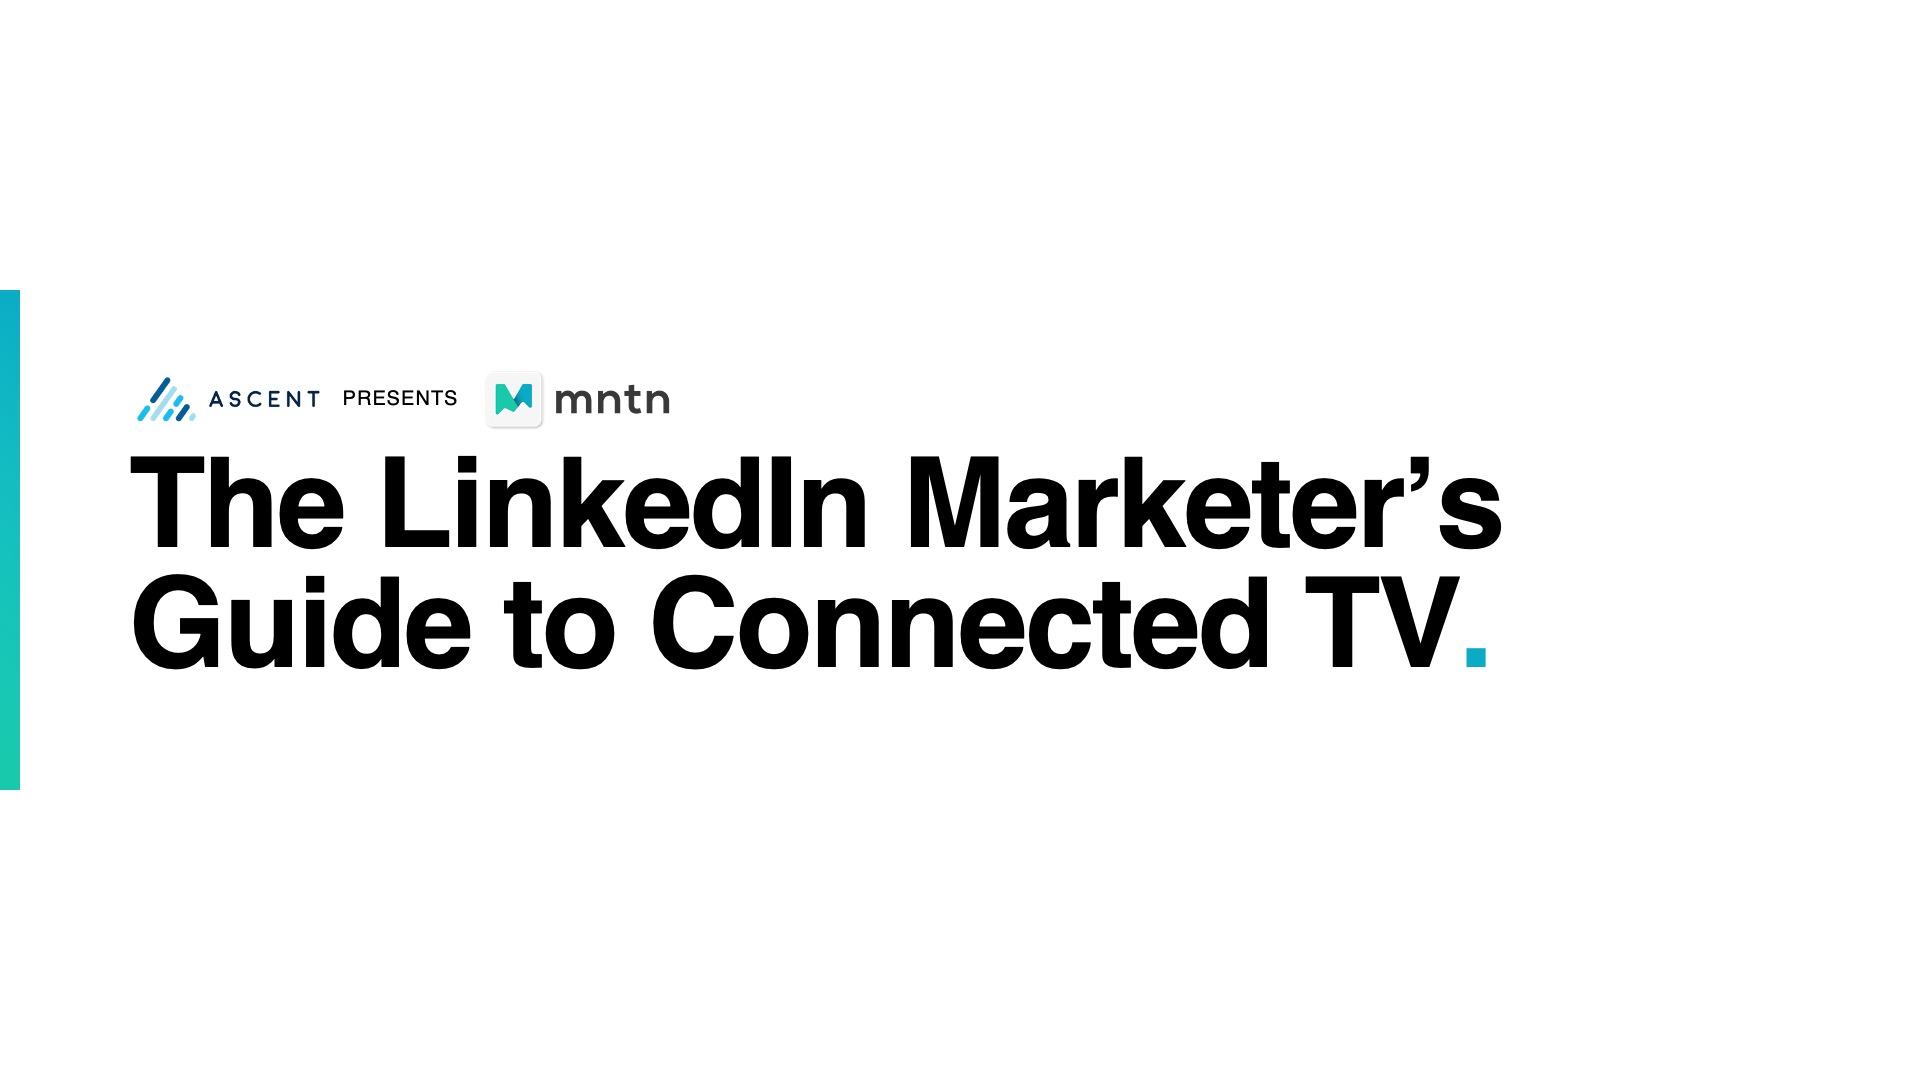 The LinkedIn Marketer’s Guide to Connected TV